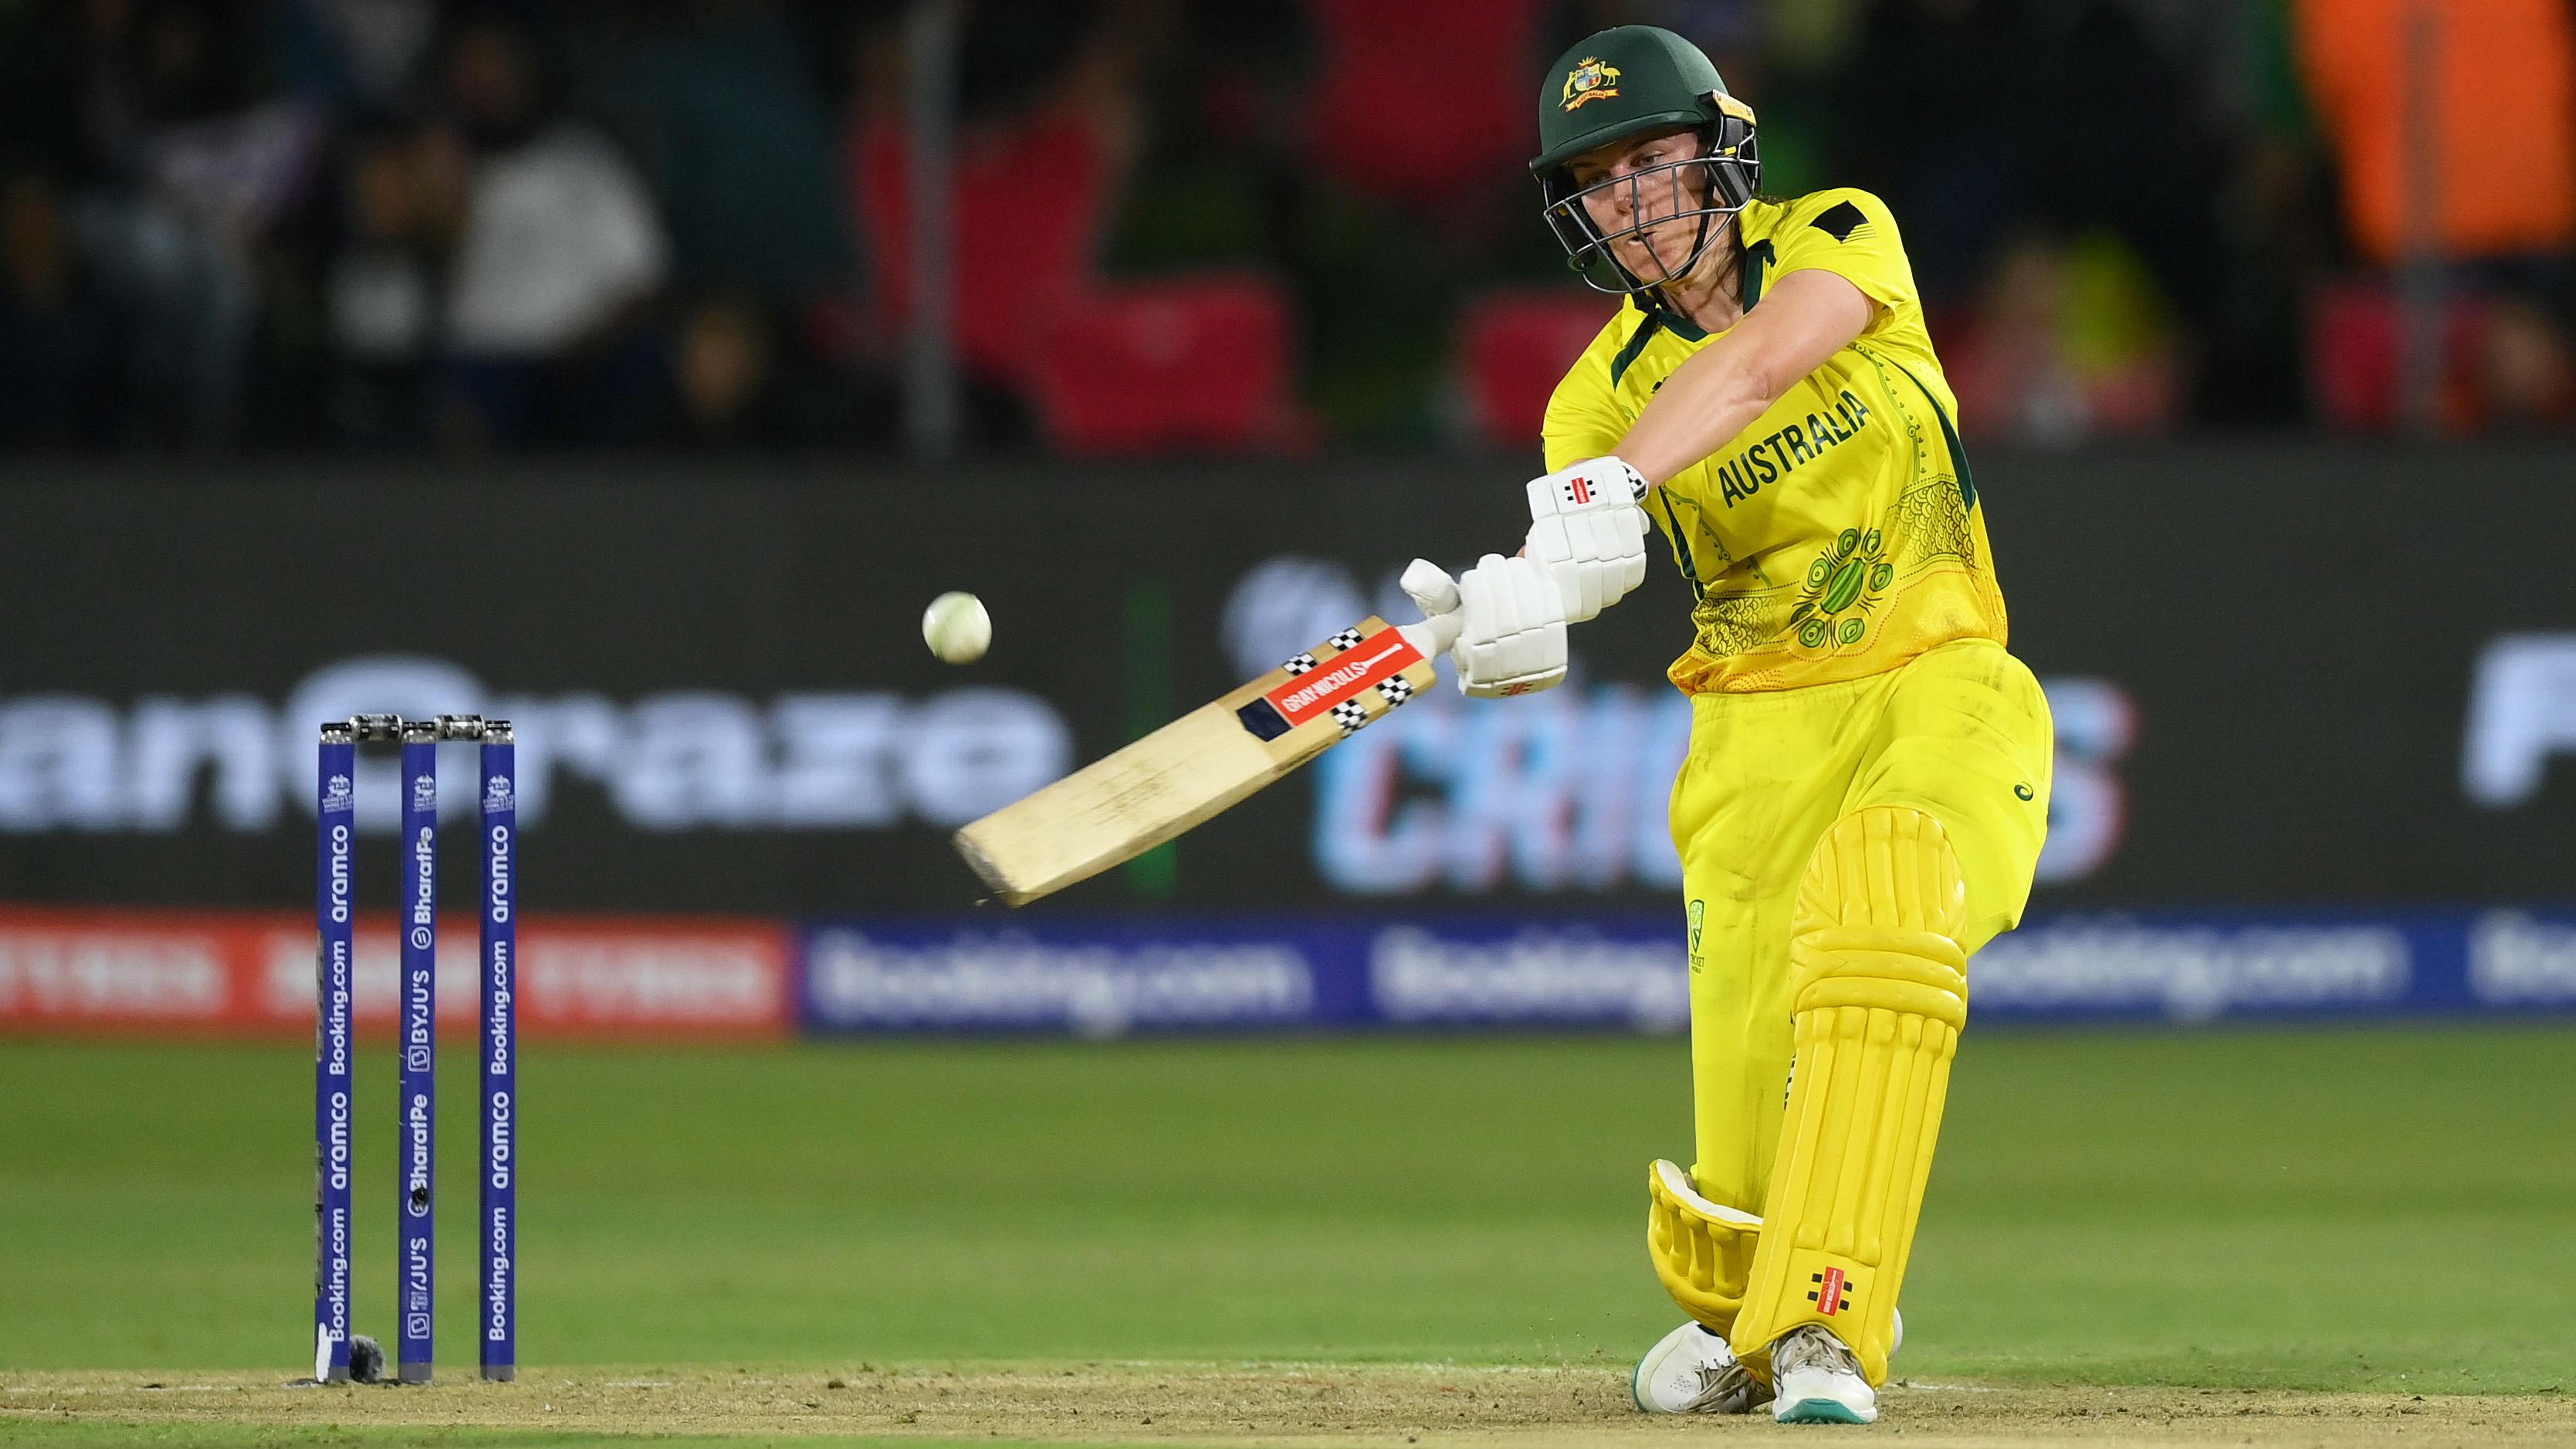 Tahlia McGrath of Australia plays a shot during the ICC Women&#x27;s T20 World Cup group A match between South Africa and Australia at St George&#x27;s Park. (Photo by Mike Hewitt/Getty Images)